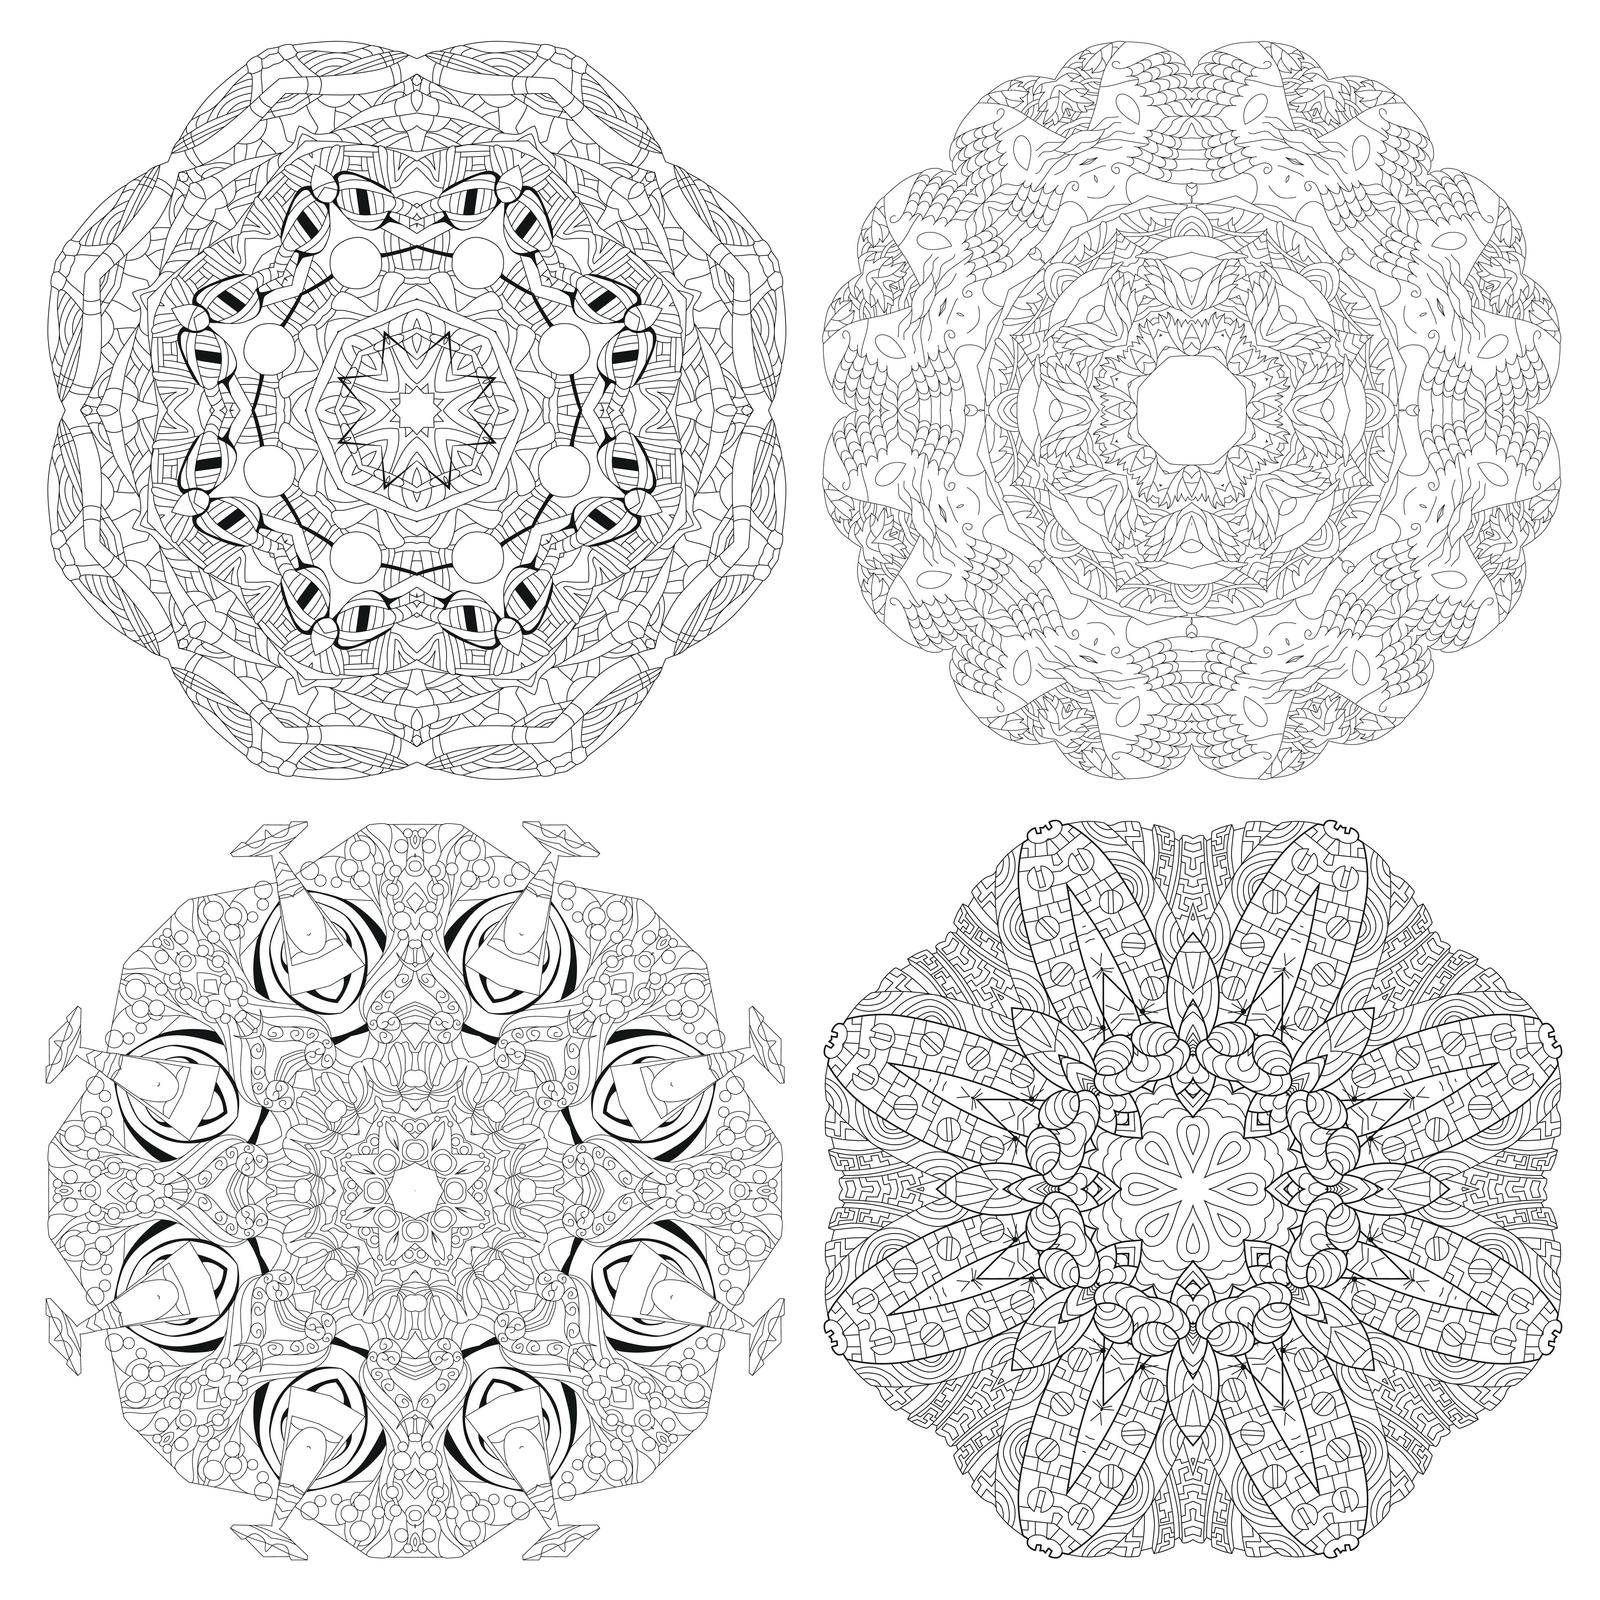 Vector Adult Coloring Book Textures. Hand-painted art design. Adult anti-stress coloring page. Black and white hand drawn illustration set of 4 mandalas for coloring book.